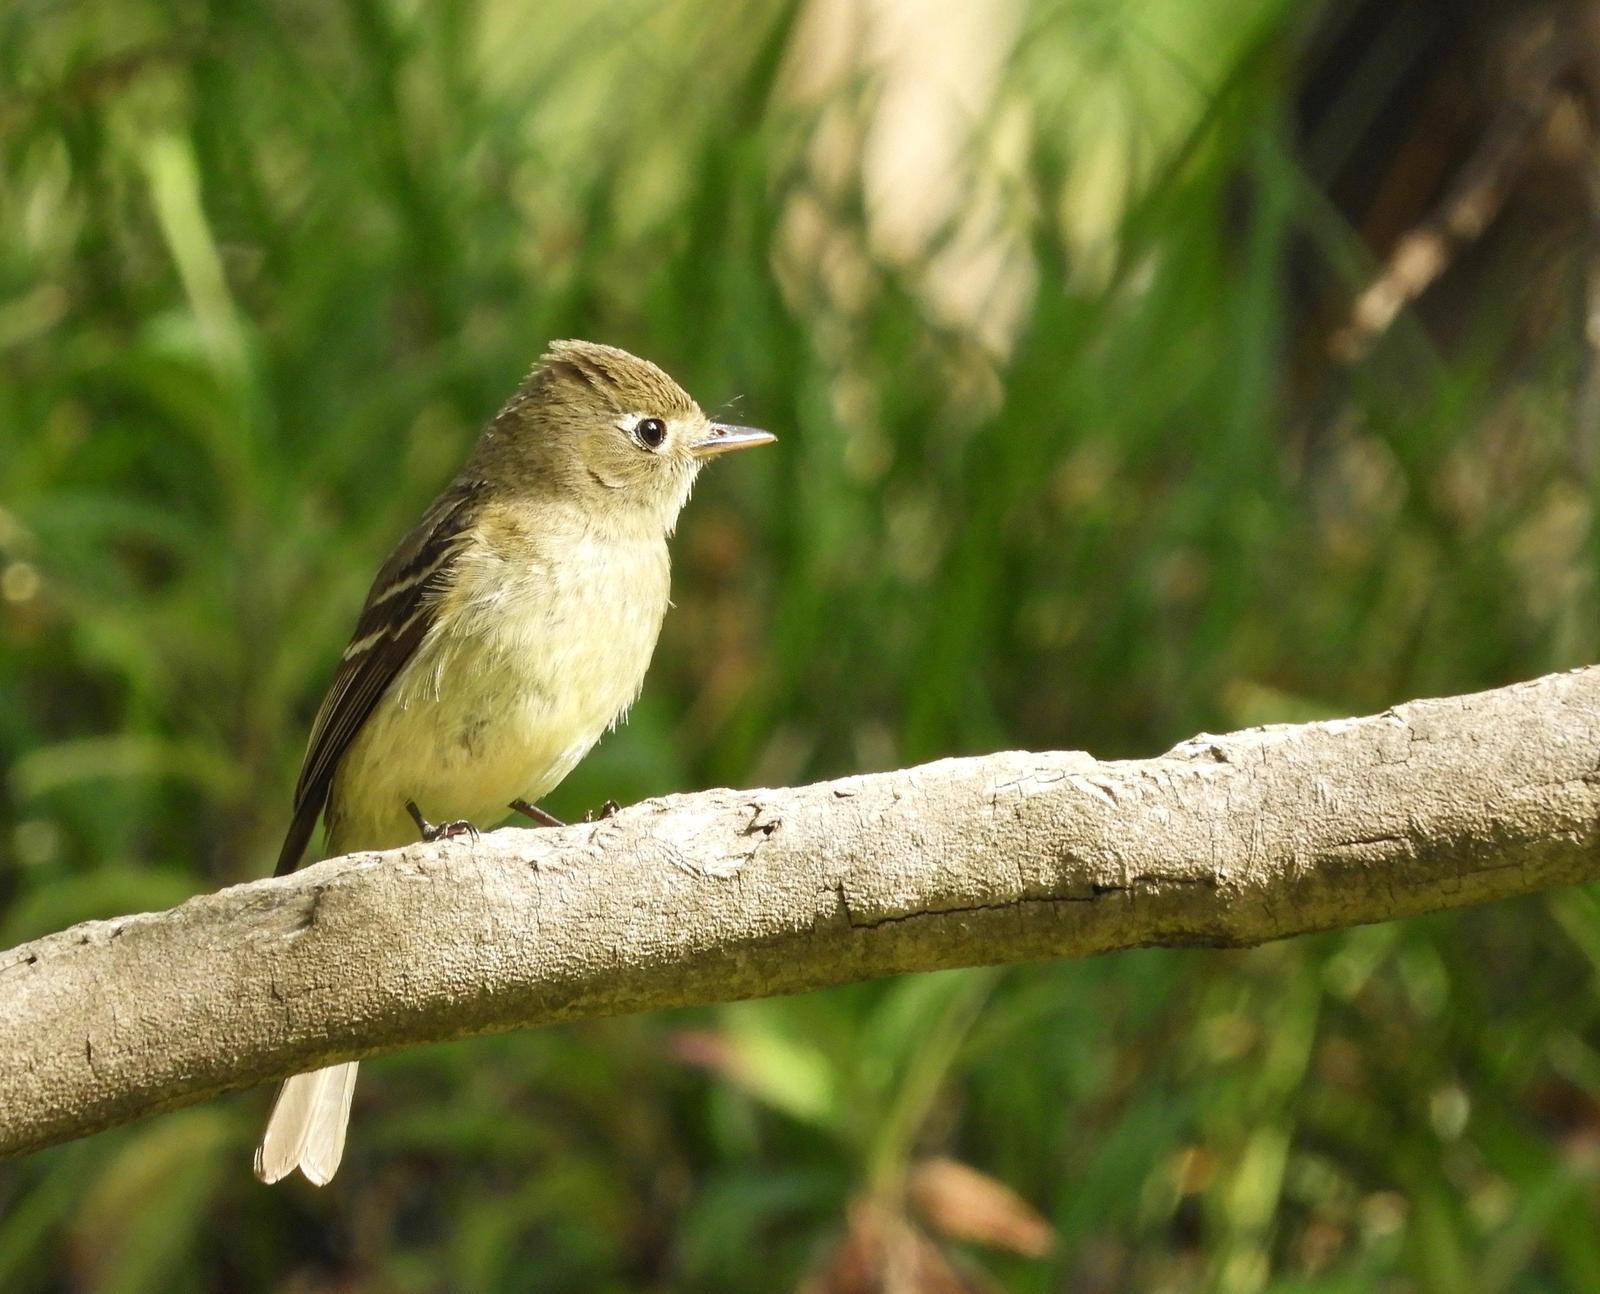 Pacific-slope Flycatcher Photo by Yvonne Burch-Hartley